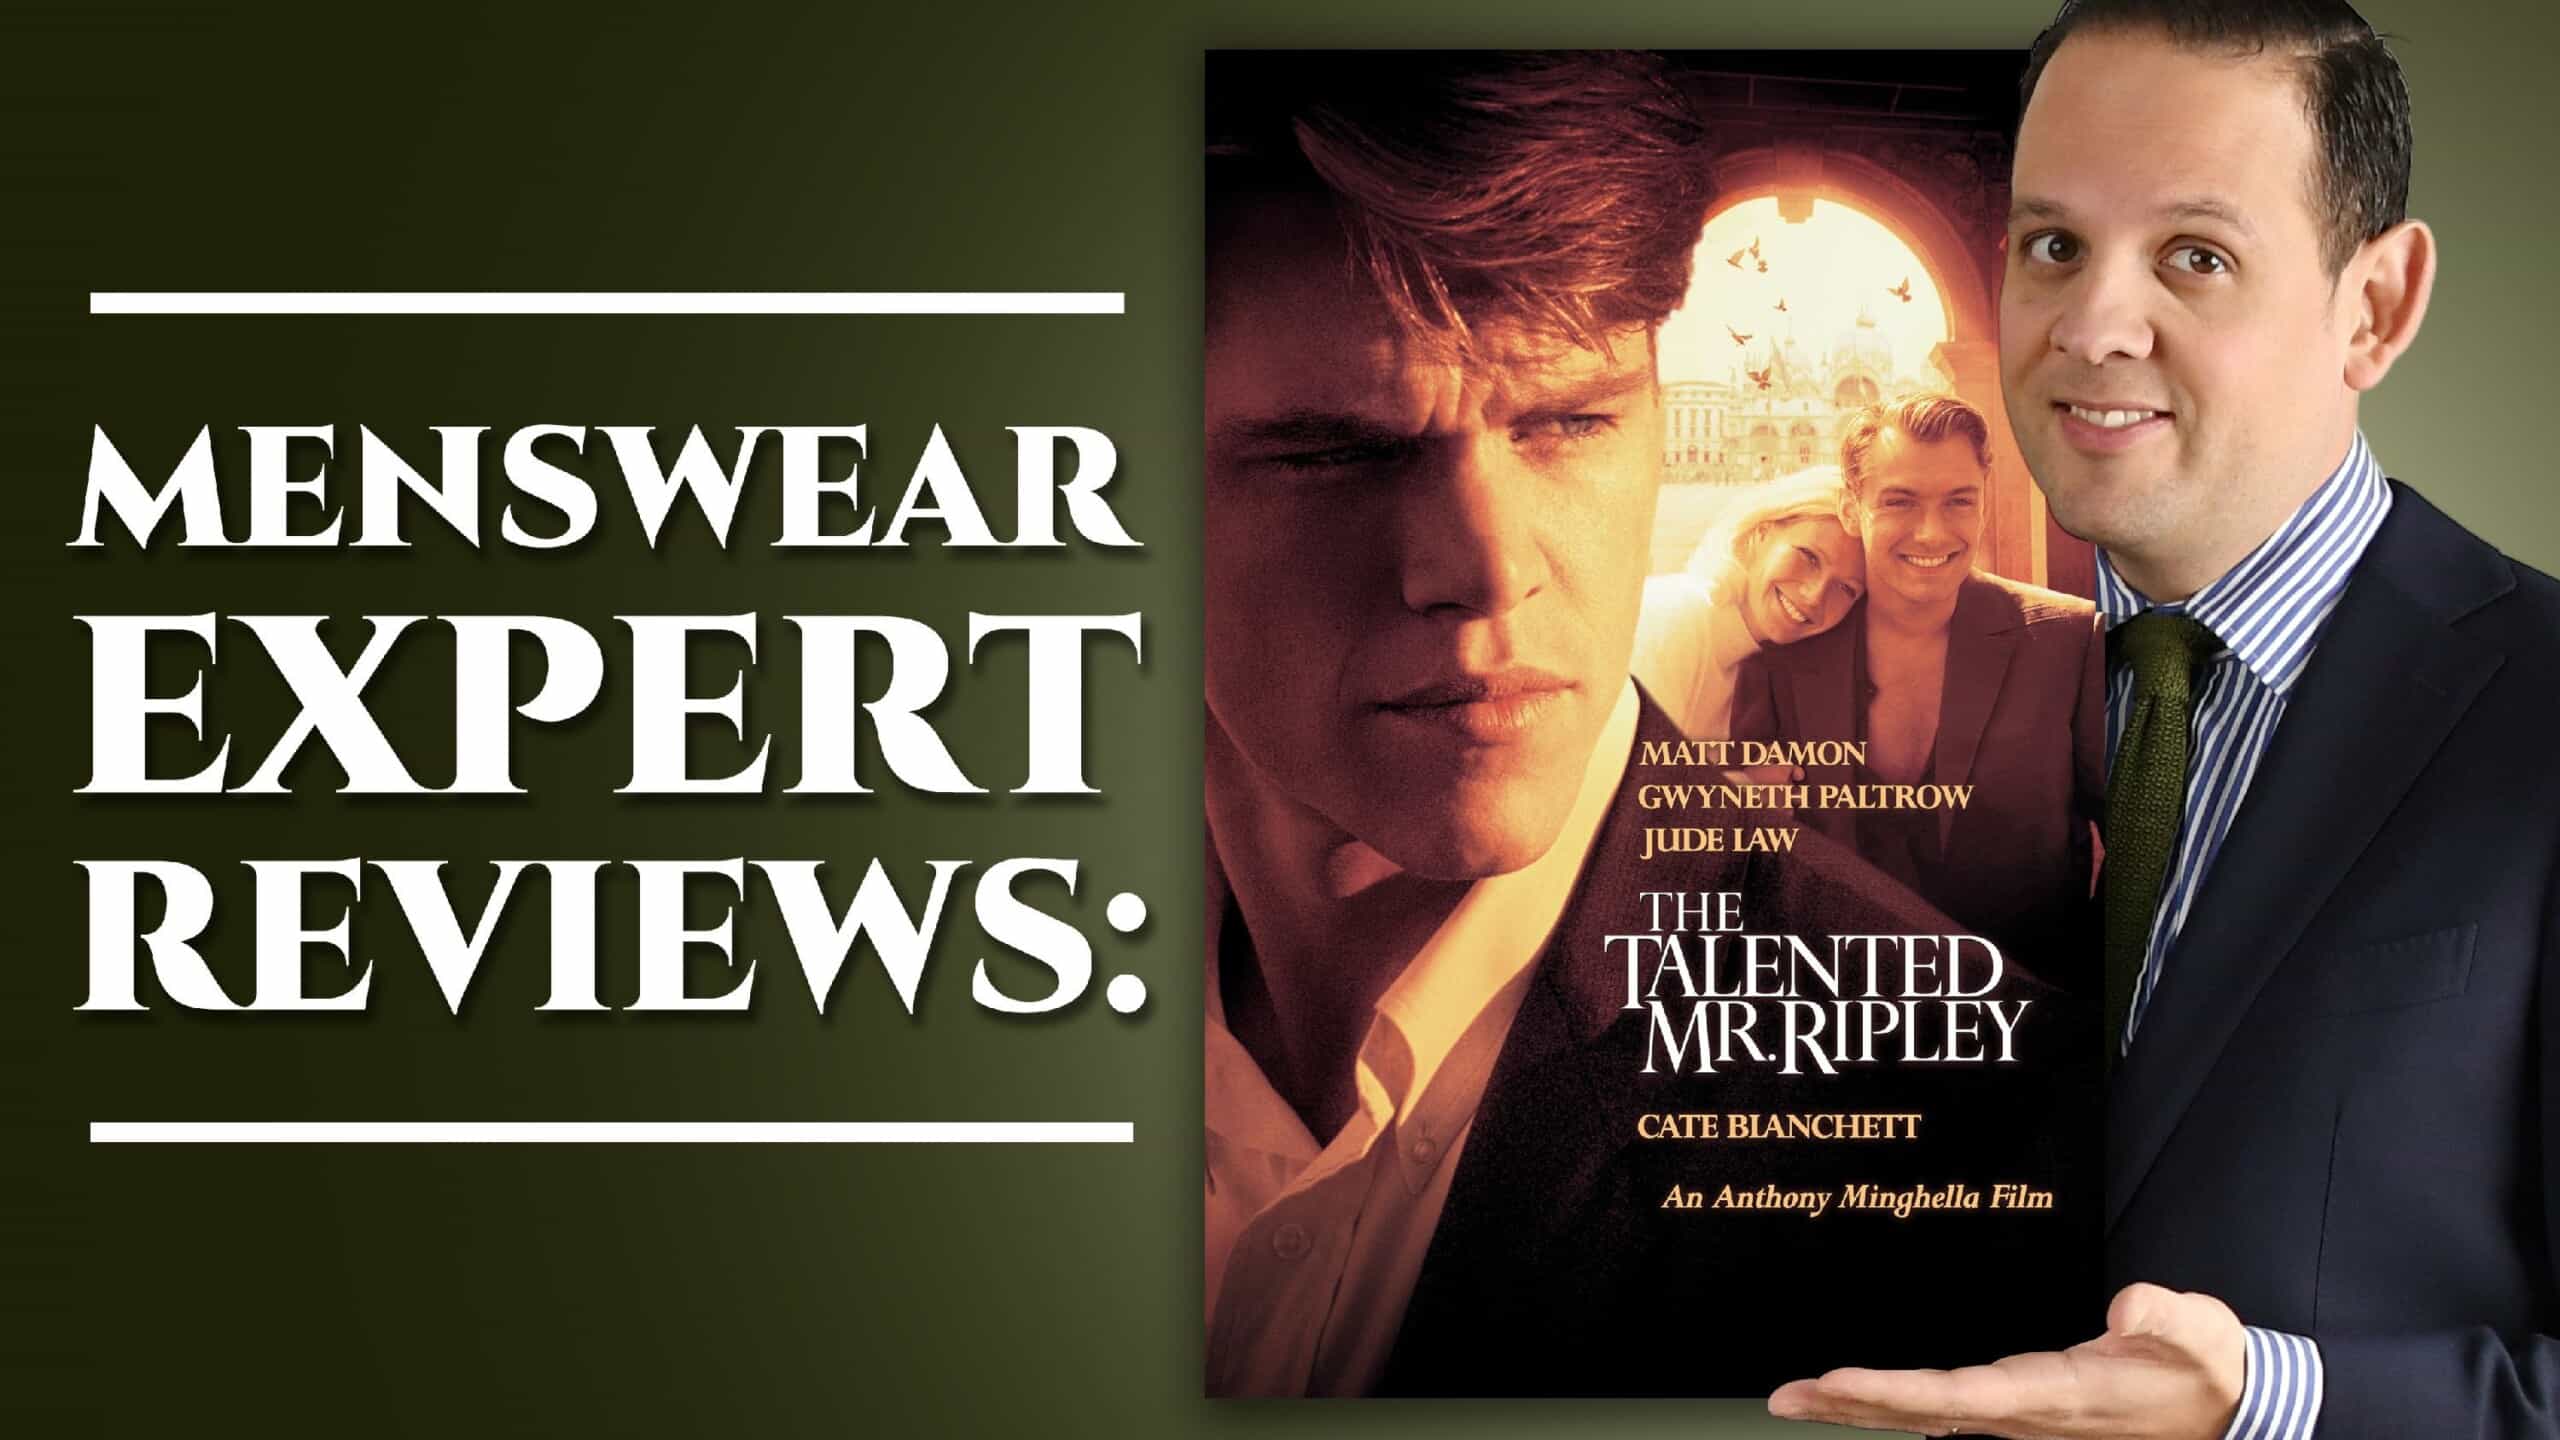 Menswear Expert Reviews The Talented Mr. Ripley